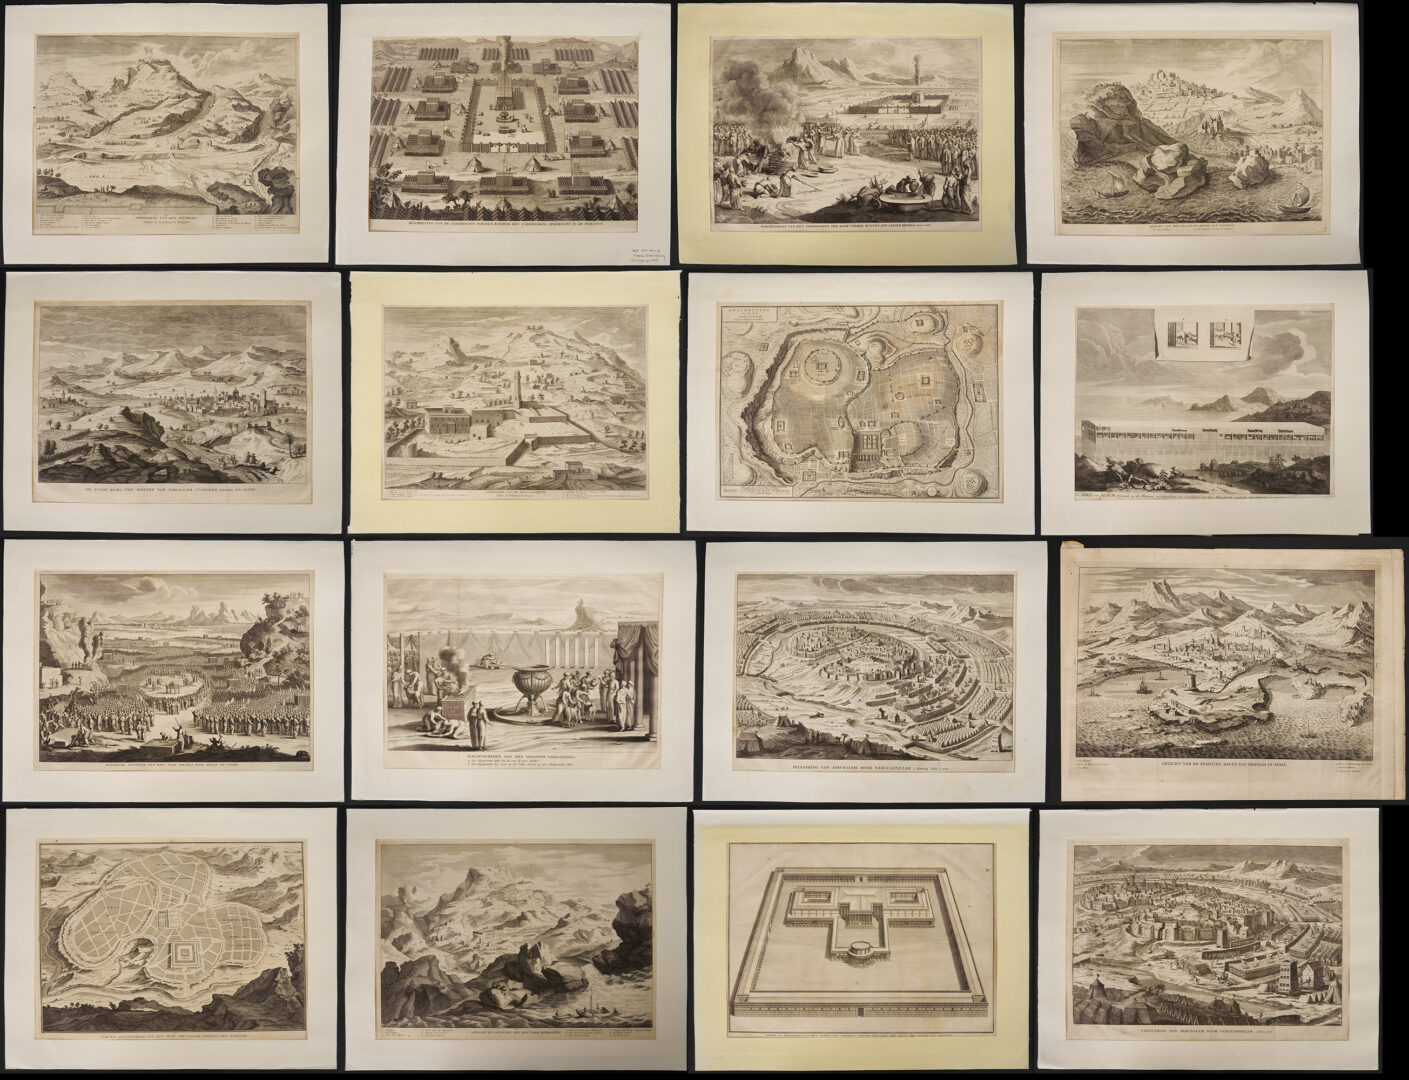 Lot 884: Calmet's Dictionary of the Holy Bible, Dutch Edition, 16 Assorted Maps & Engravings